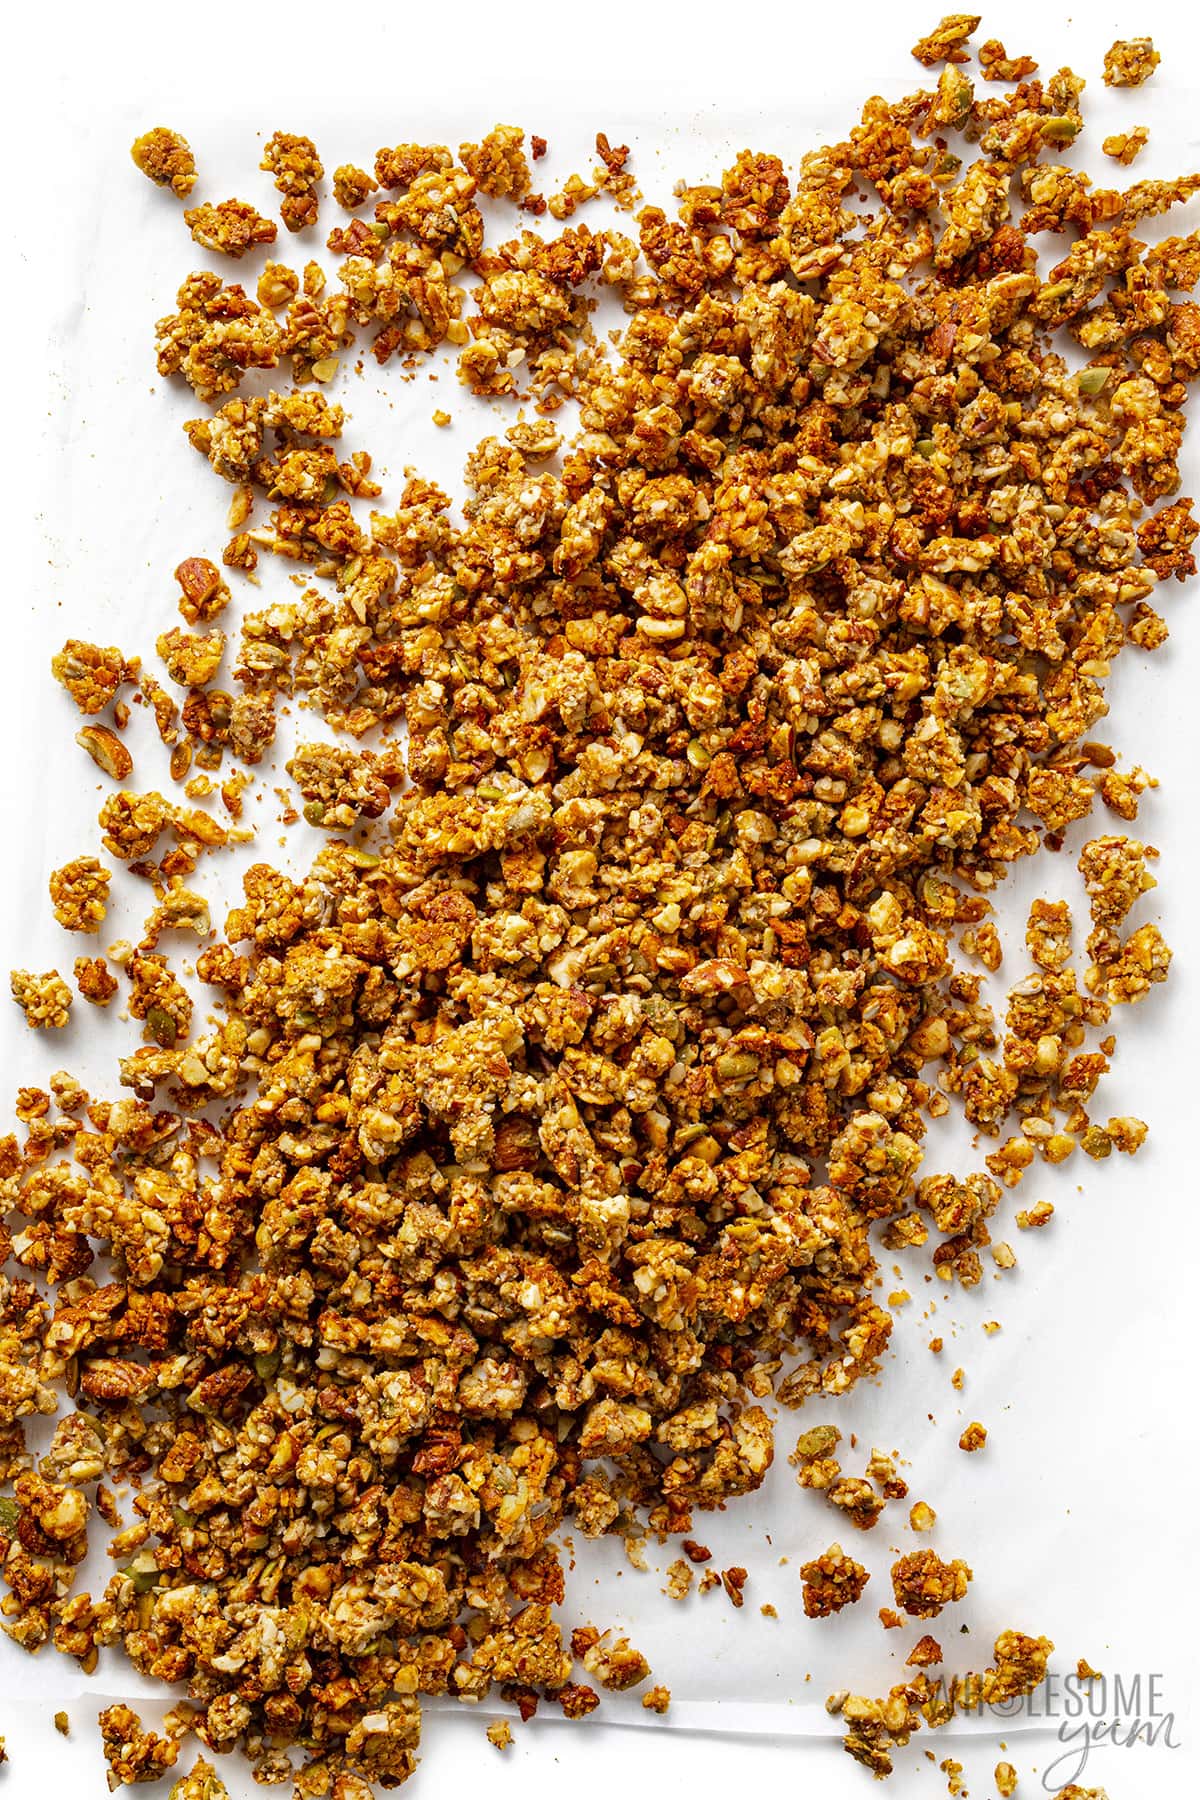 Low carb keto granola spread out on parchment paper.